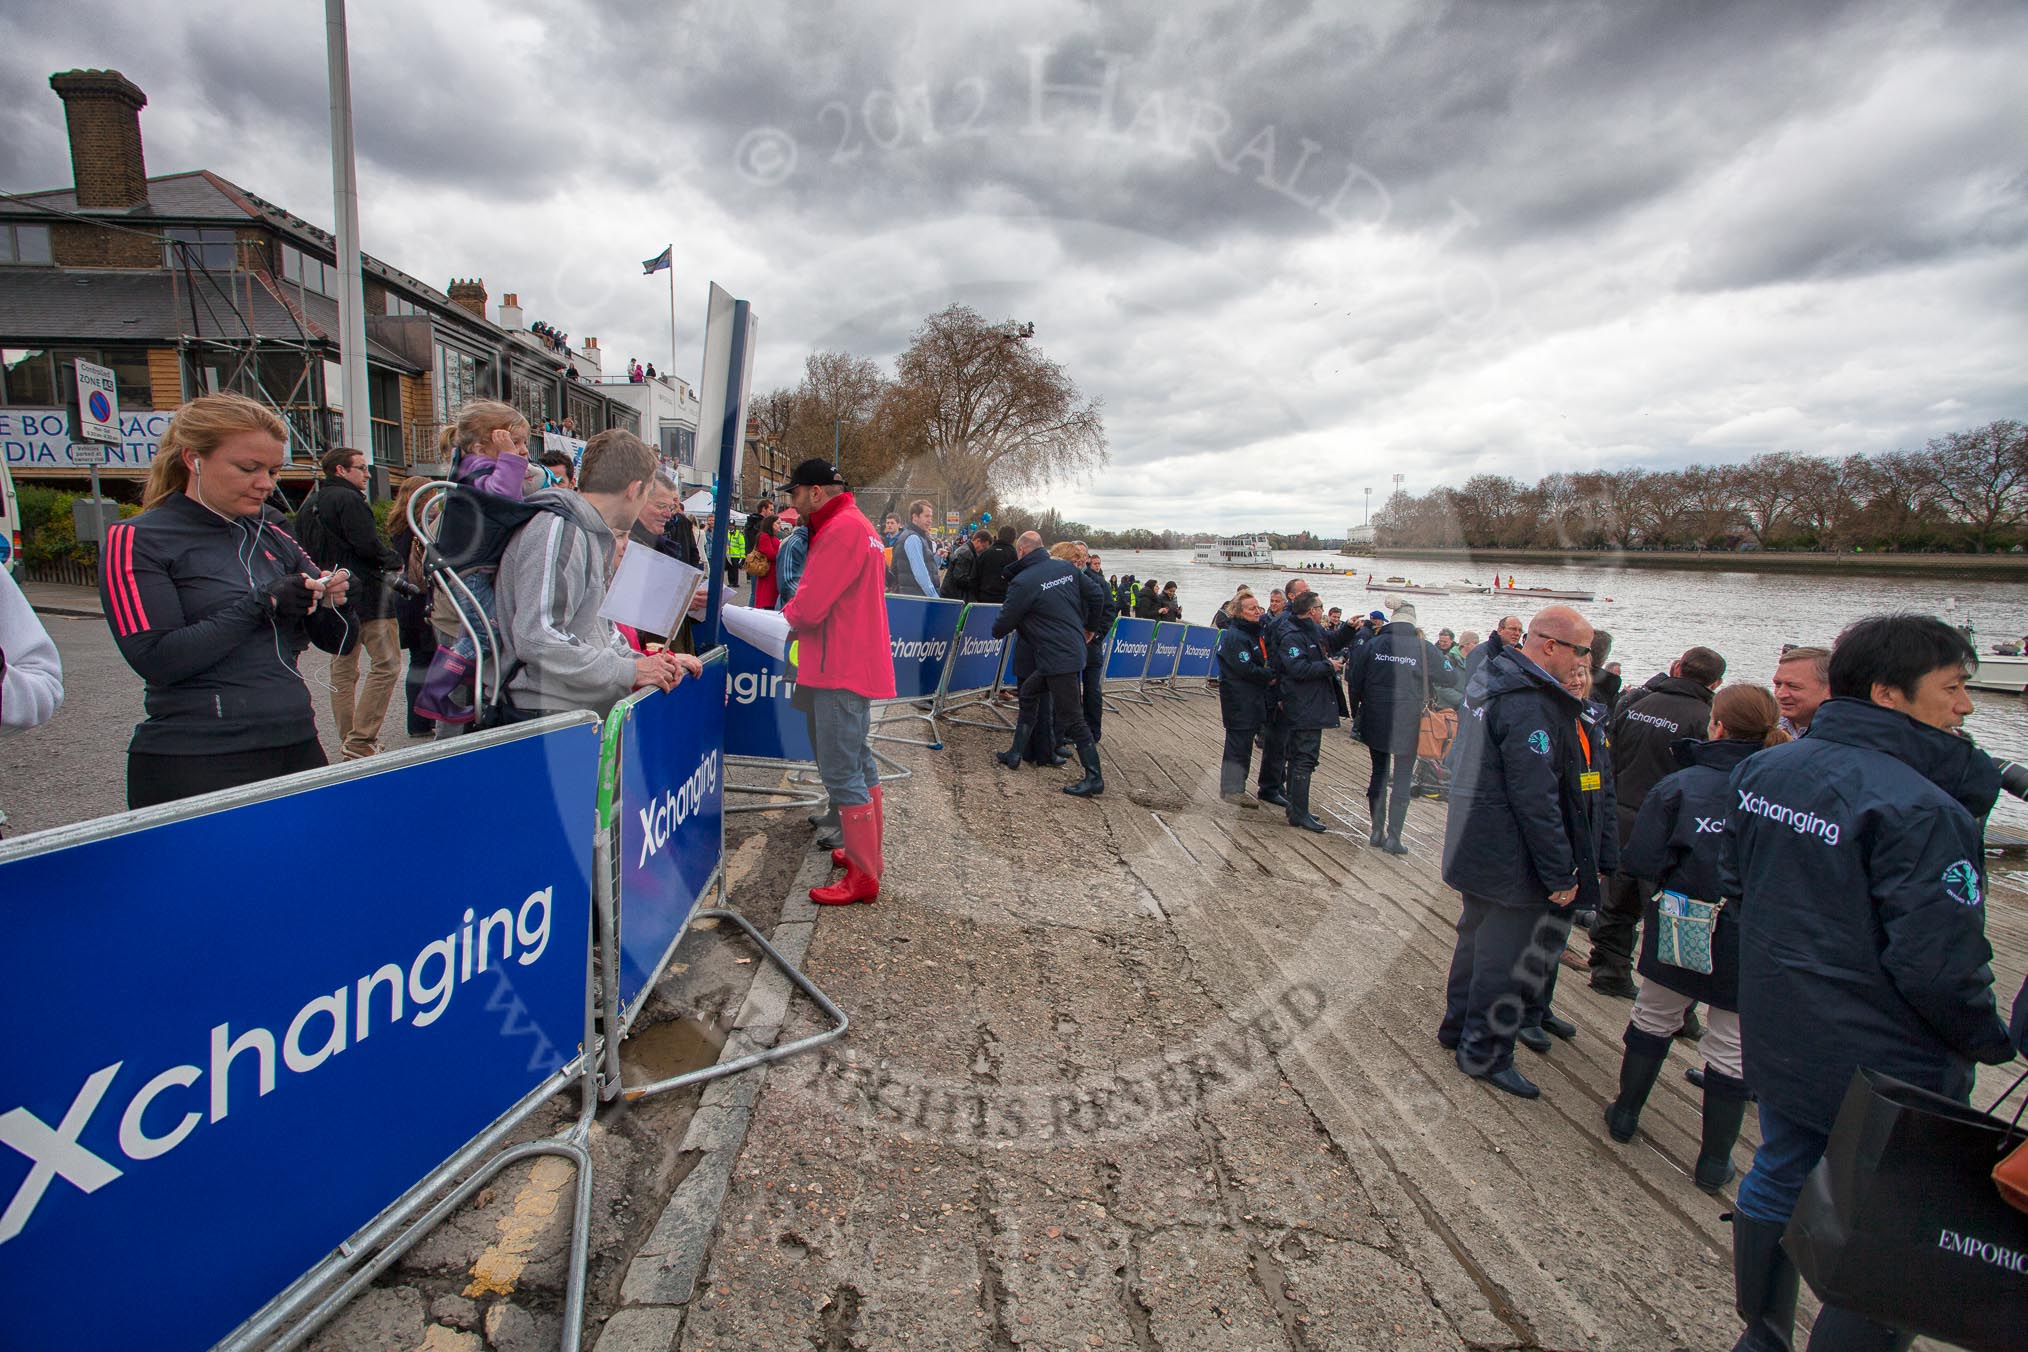 The Boat Race 2012: Putney Embankment before the Boat Race: Waiting to get on board of one of the boats of the flotilla that will follow the Boat Race - members of the media, and officials..




on 07 April 2012 at 13:13, image #121